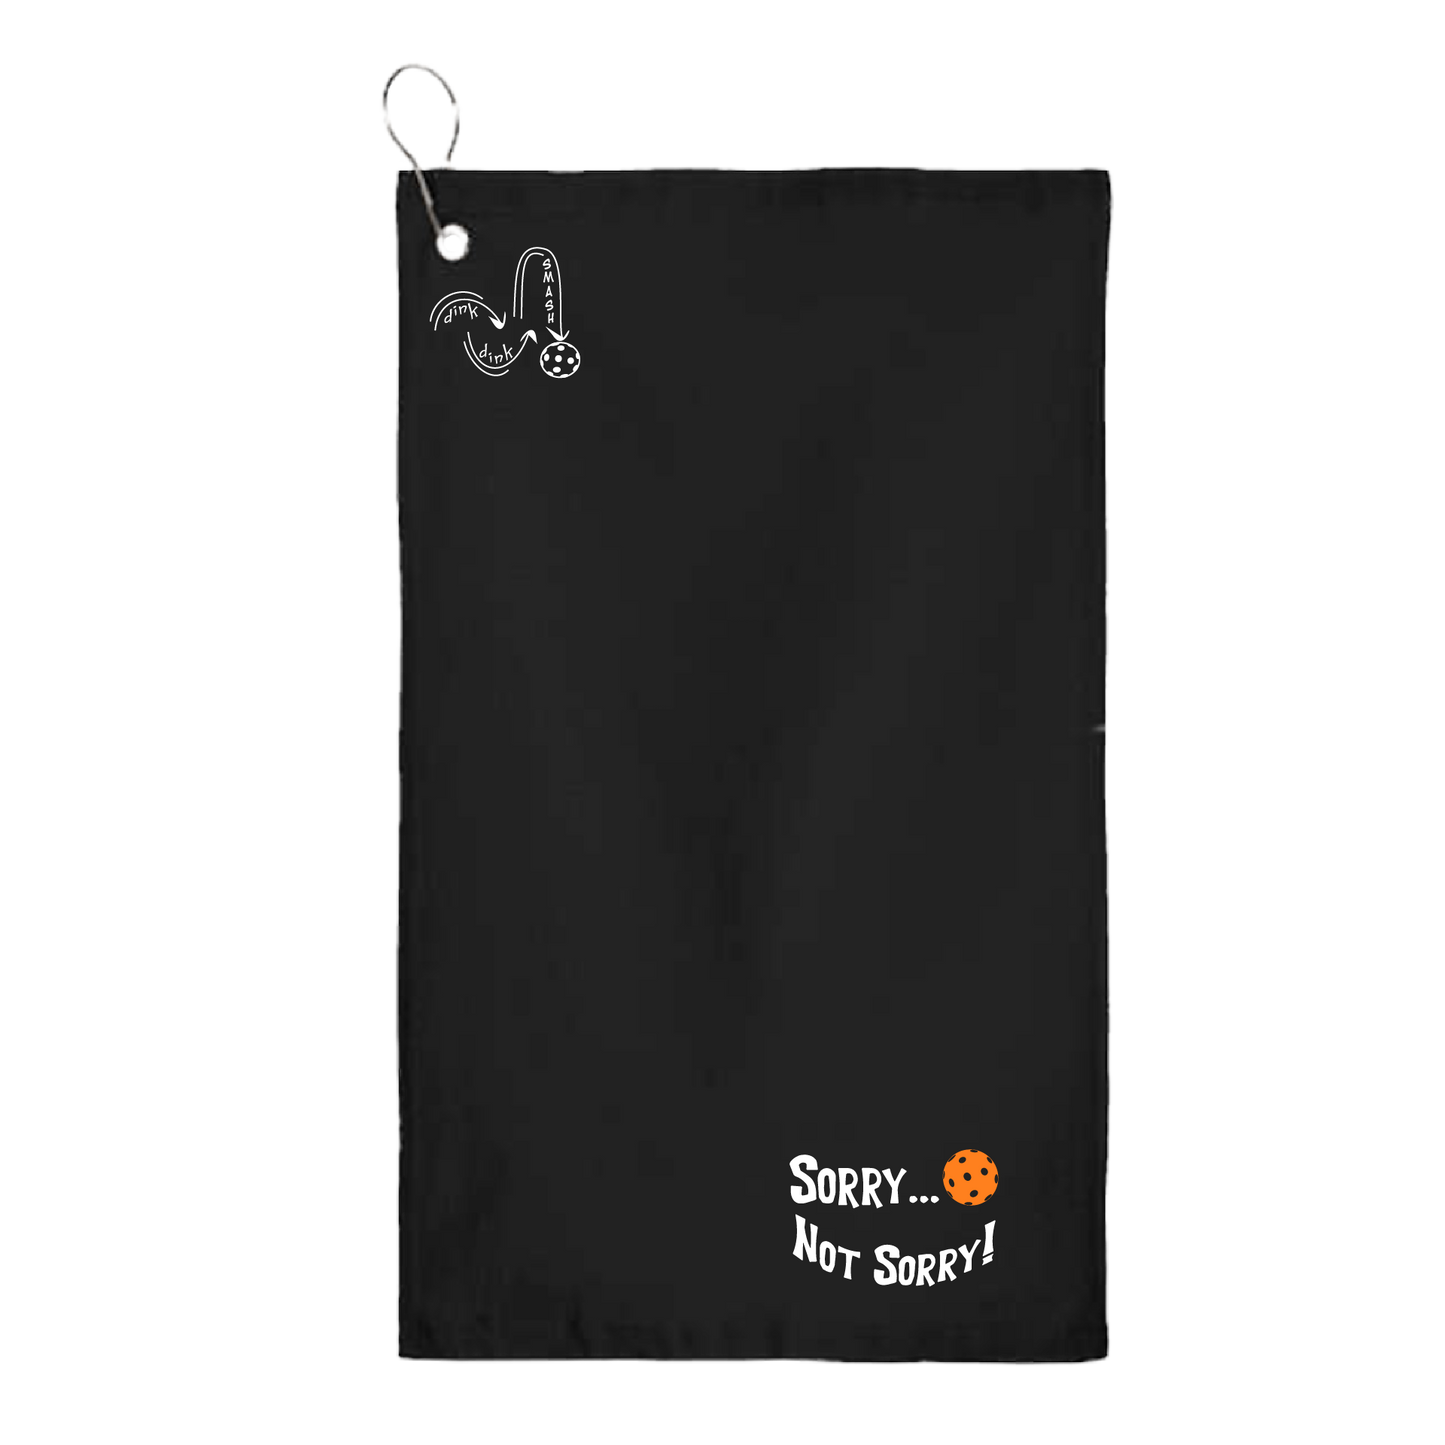 This Sorry...Not Sorry pickleball towel is crafted with cotton terry velour for optimal performance. It features grommets, hooks, and hemmed edges for added durability. It's perfect for completing your pickleball gear, and an ideal gift for friends and tournaments. The towel is designed to be both absorbent and lightweight, so you can remain dry and comfortable while you play.